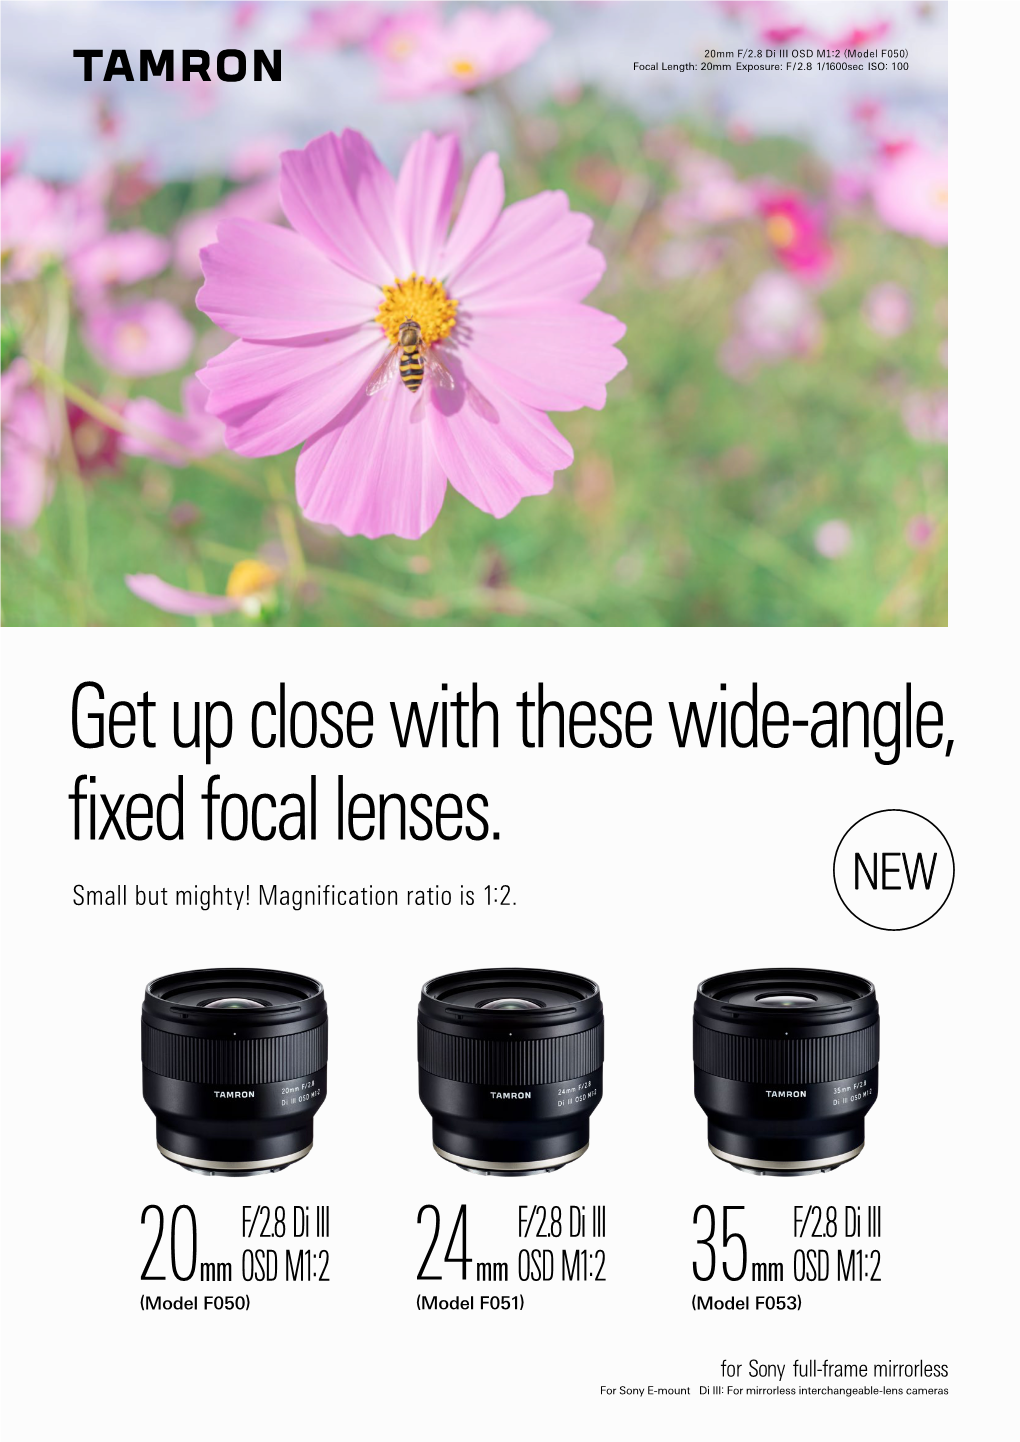 Get up Close with These Wide-Angle, Fixed Focal Lenses. Small but Mighty! Magnification Ratio Is 1:2